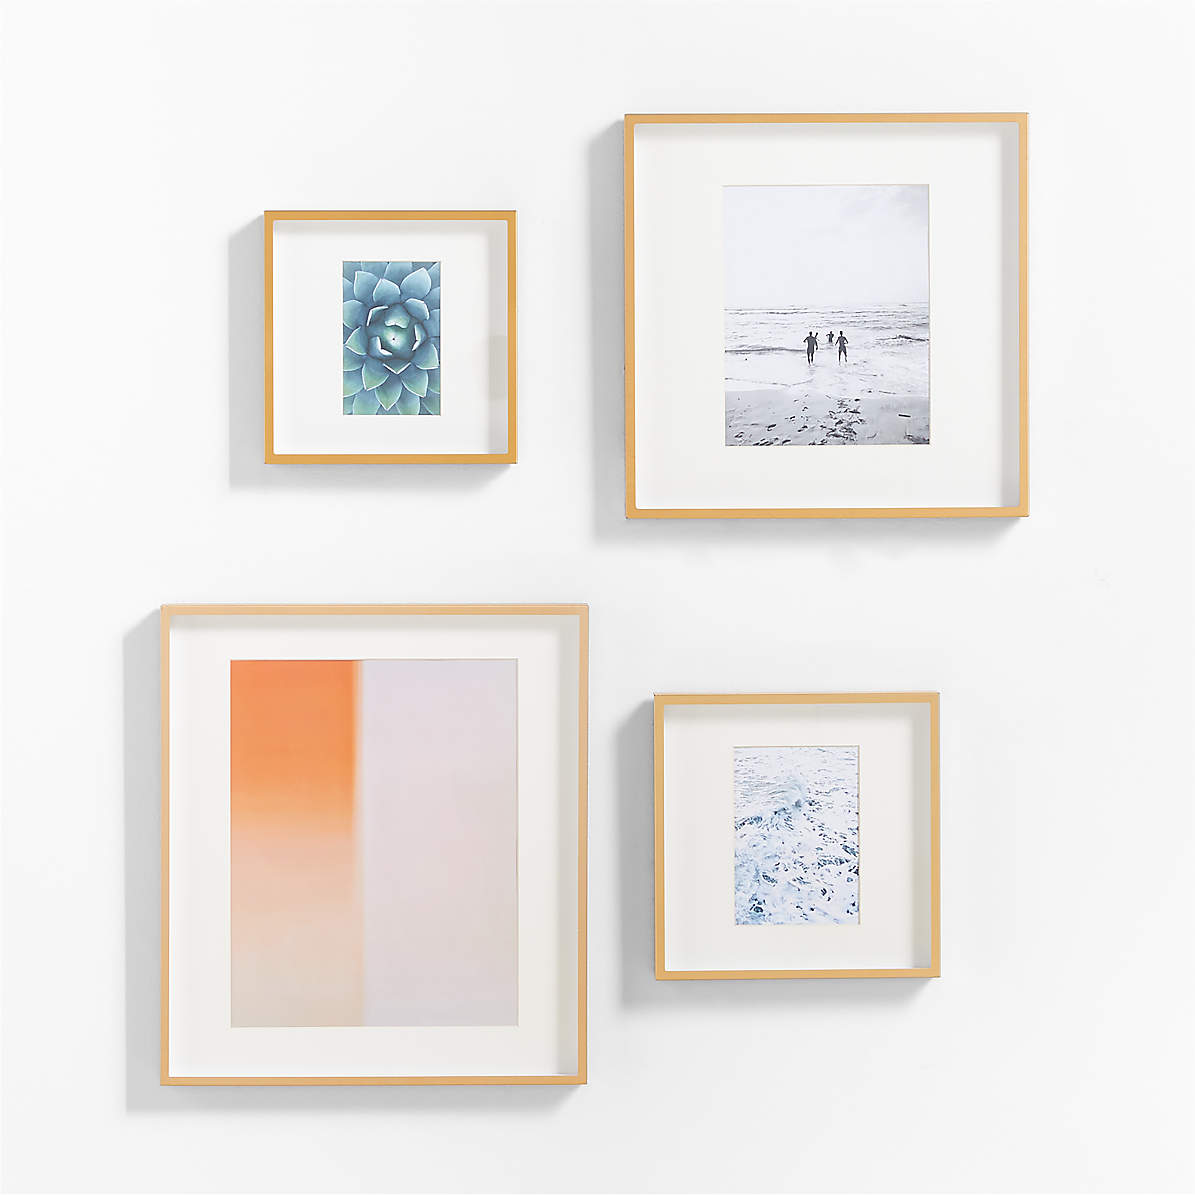 6-Piece Brushed Silver 11x11 Gallery Wall Picture Frame Set + Reviews